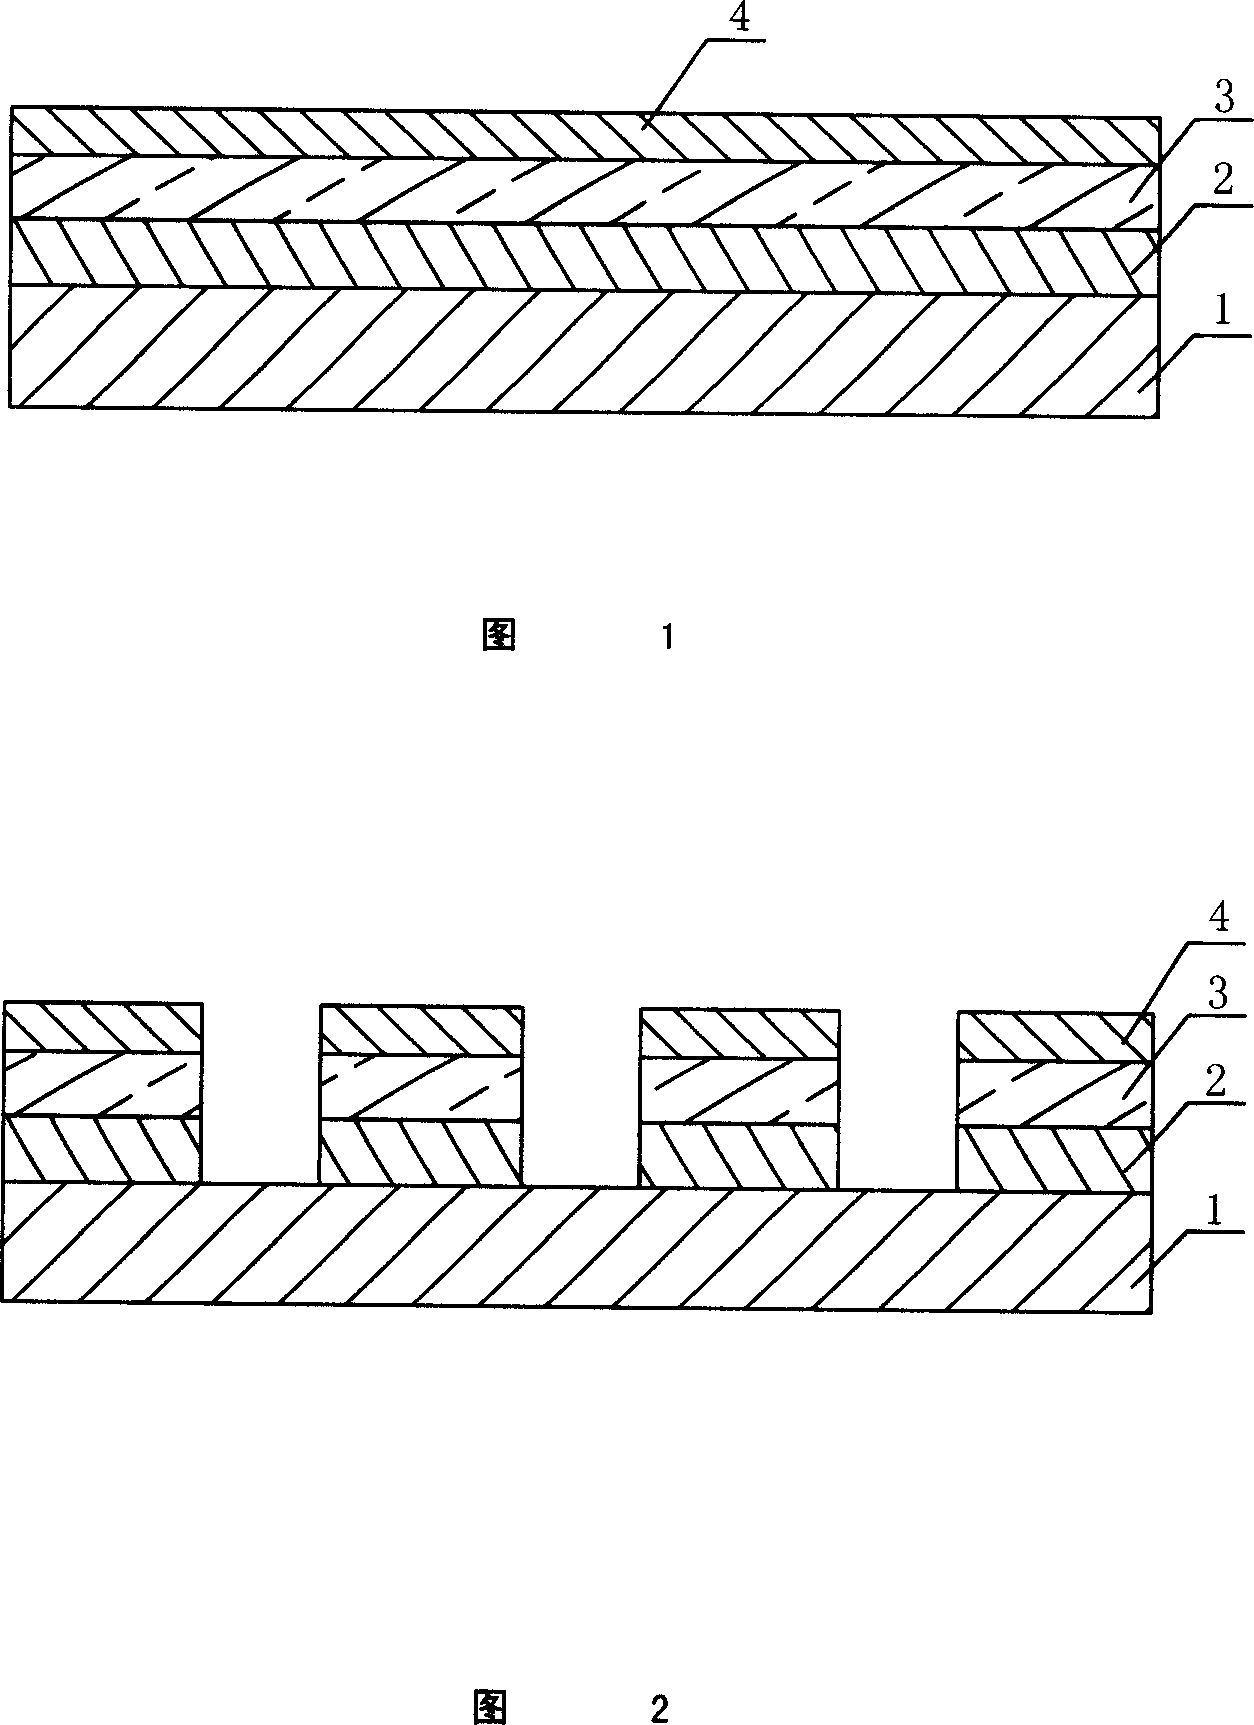 An organic light-emitting display device electrode substrate